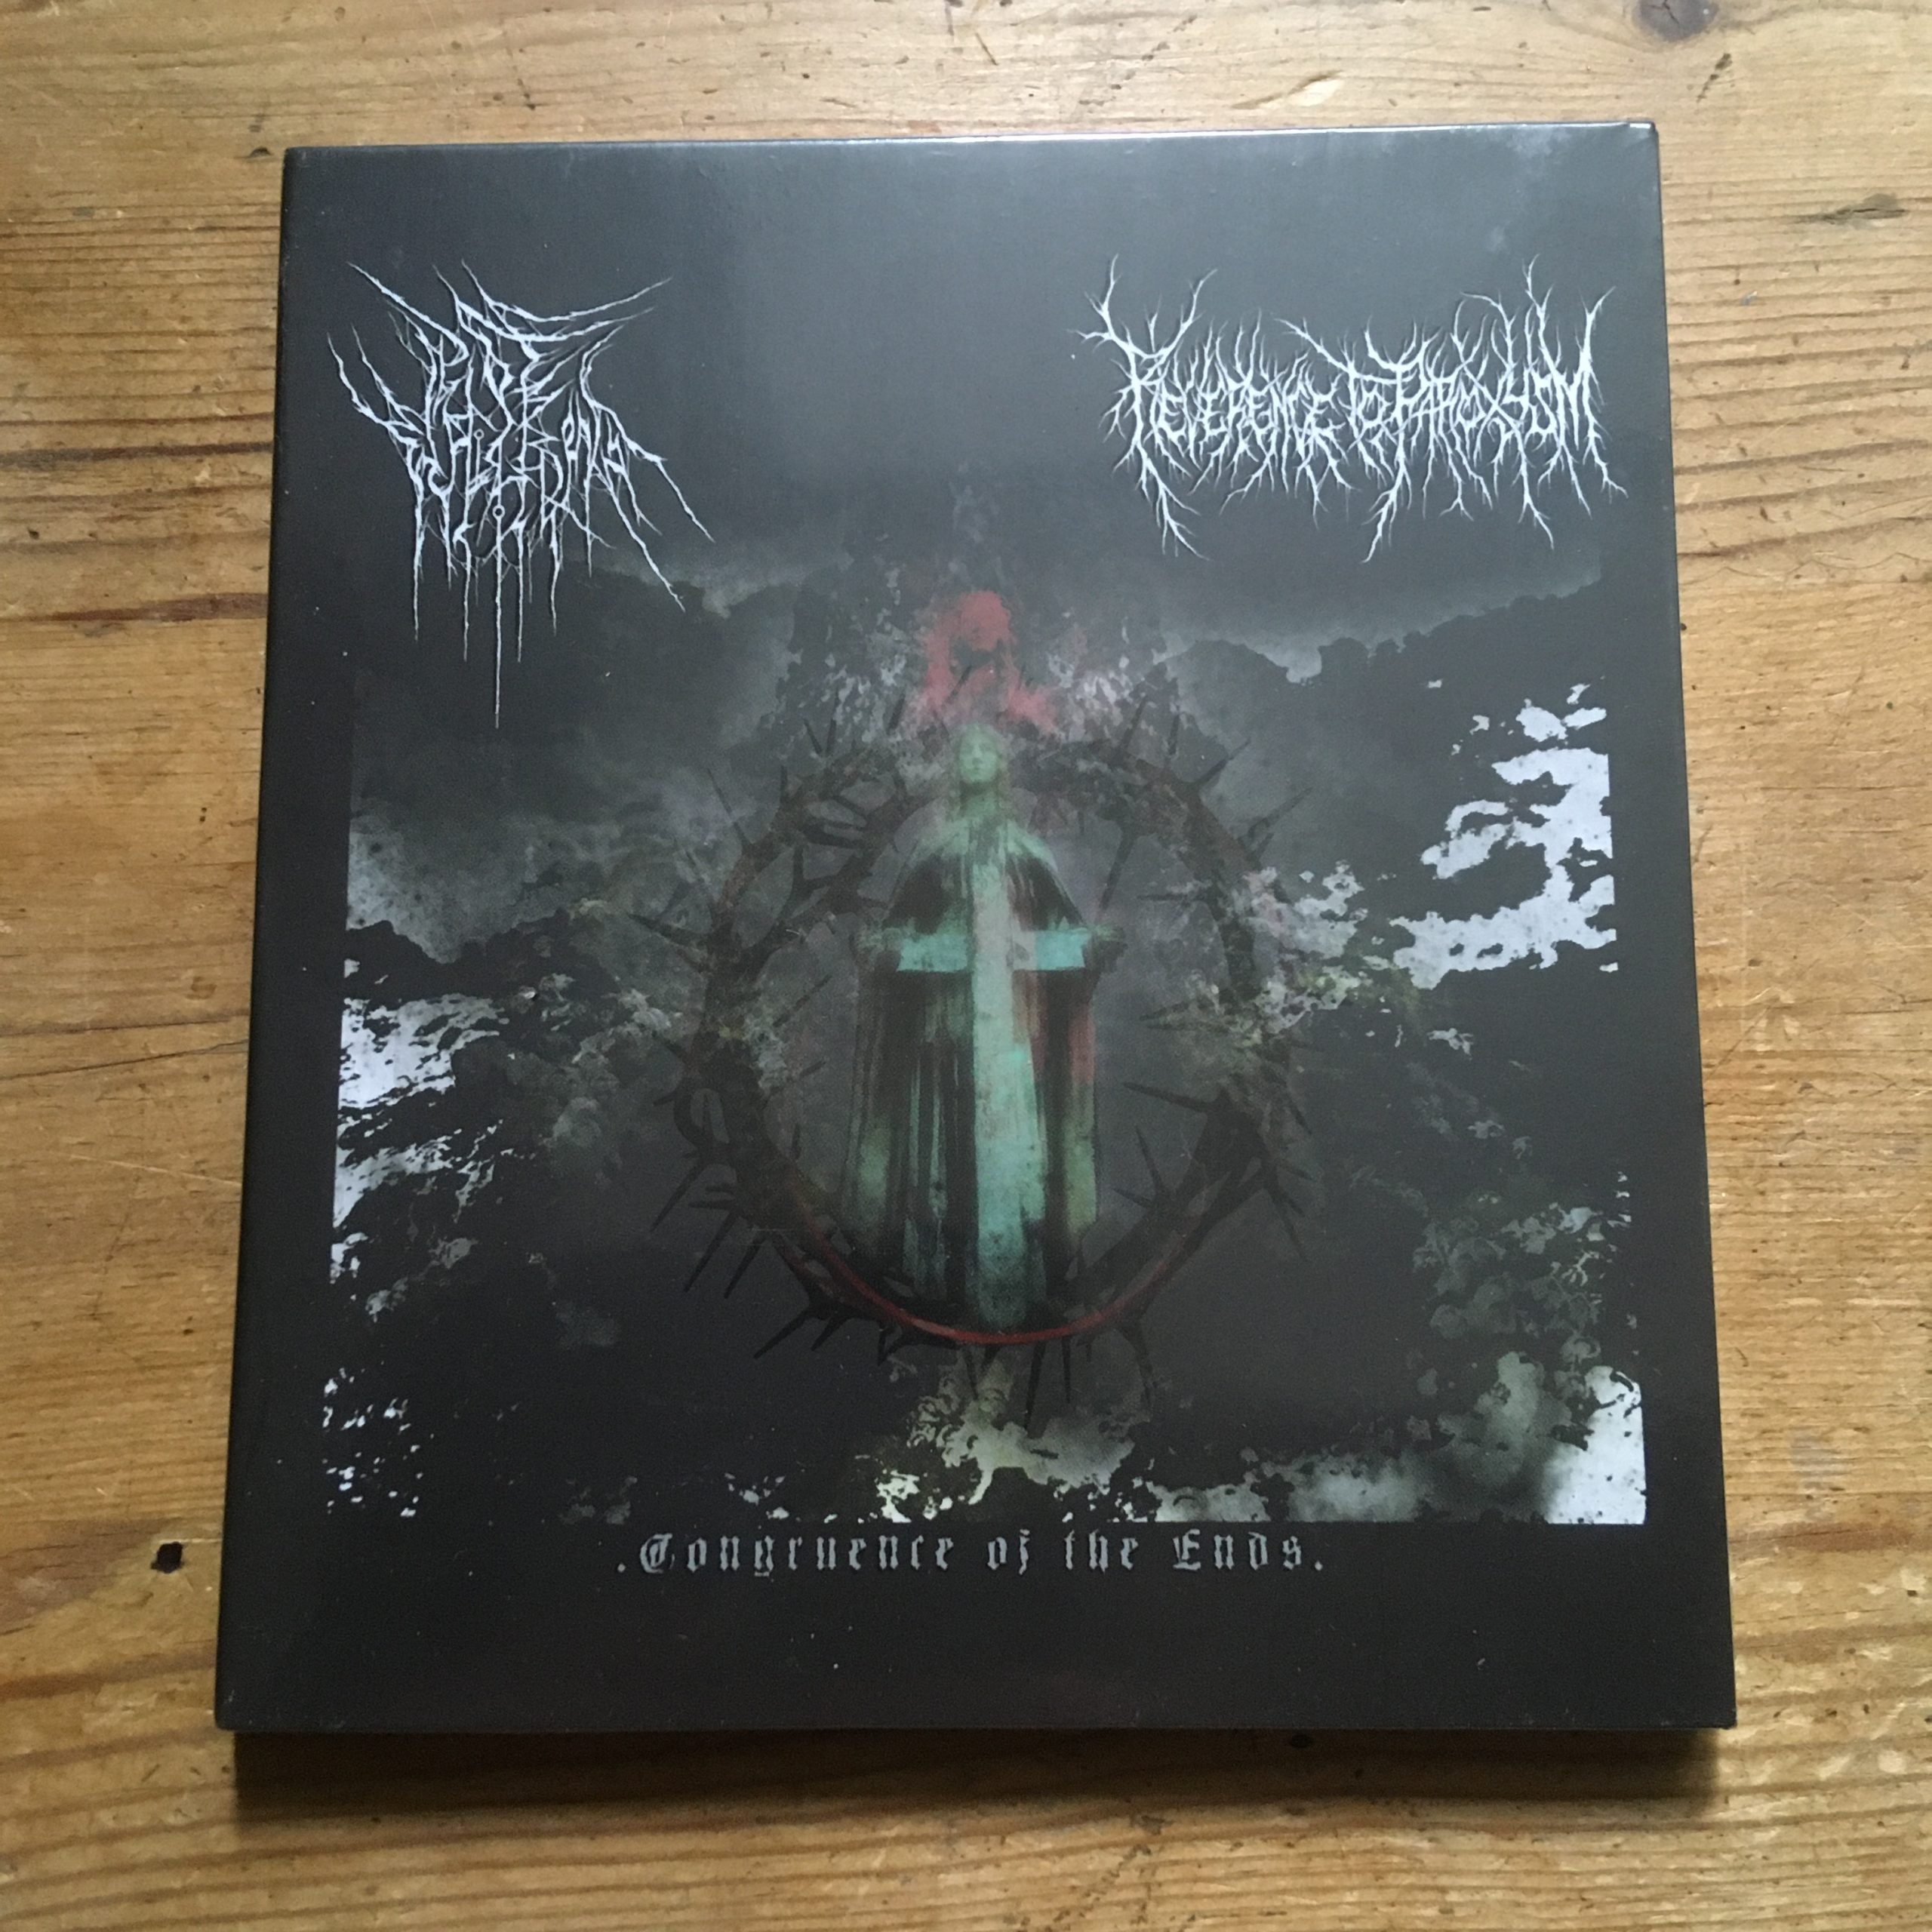 Photo of the Pestilength / Reverence to ParOxysm - "Congruence of the Ends." digipack CD